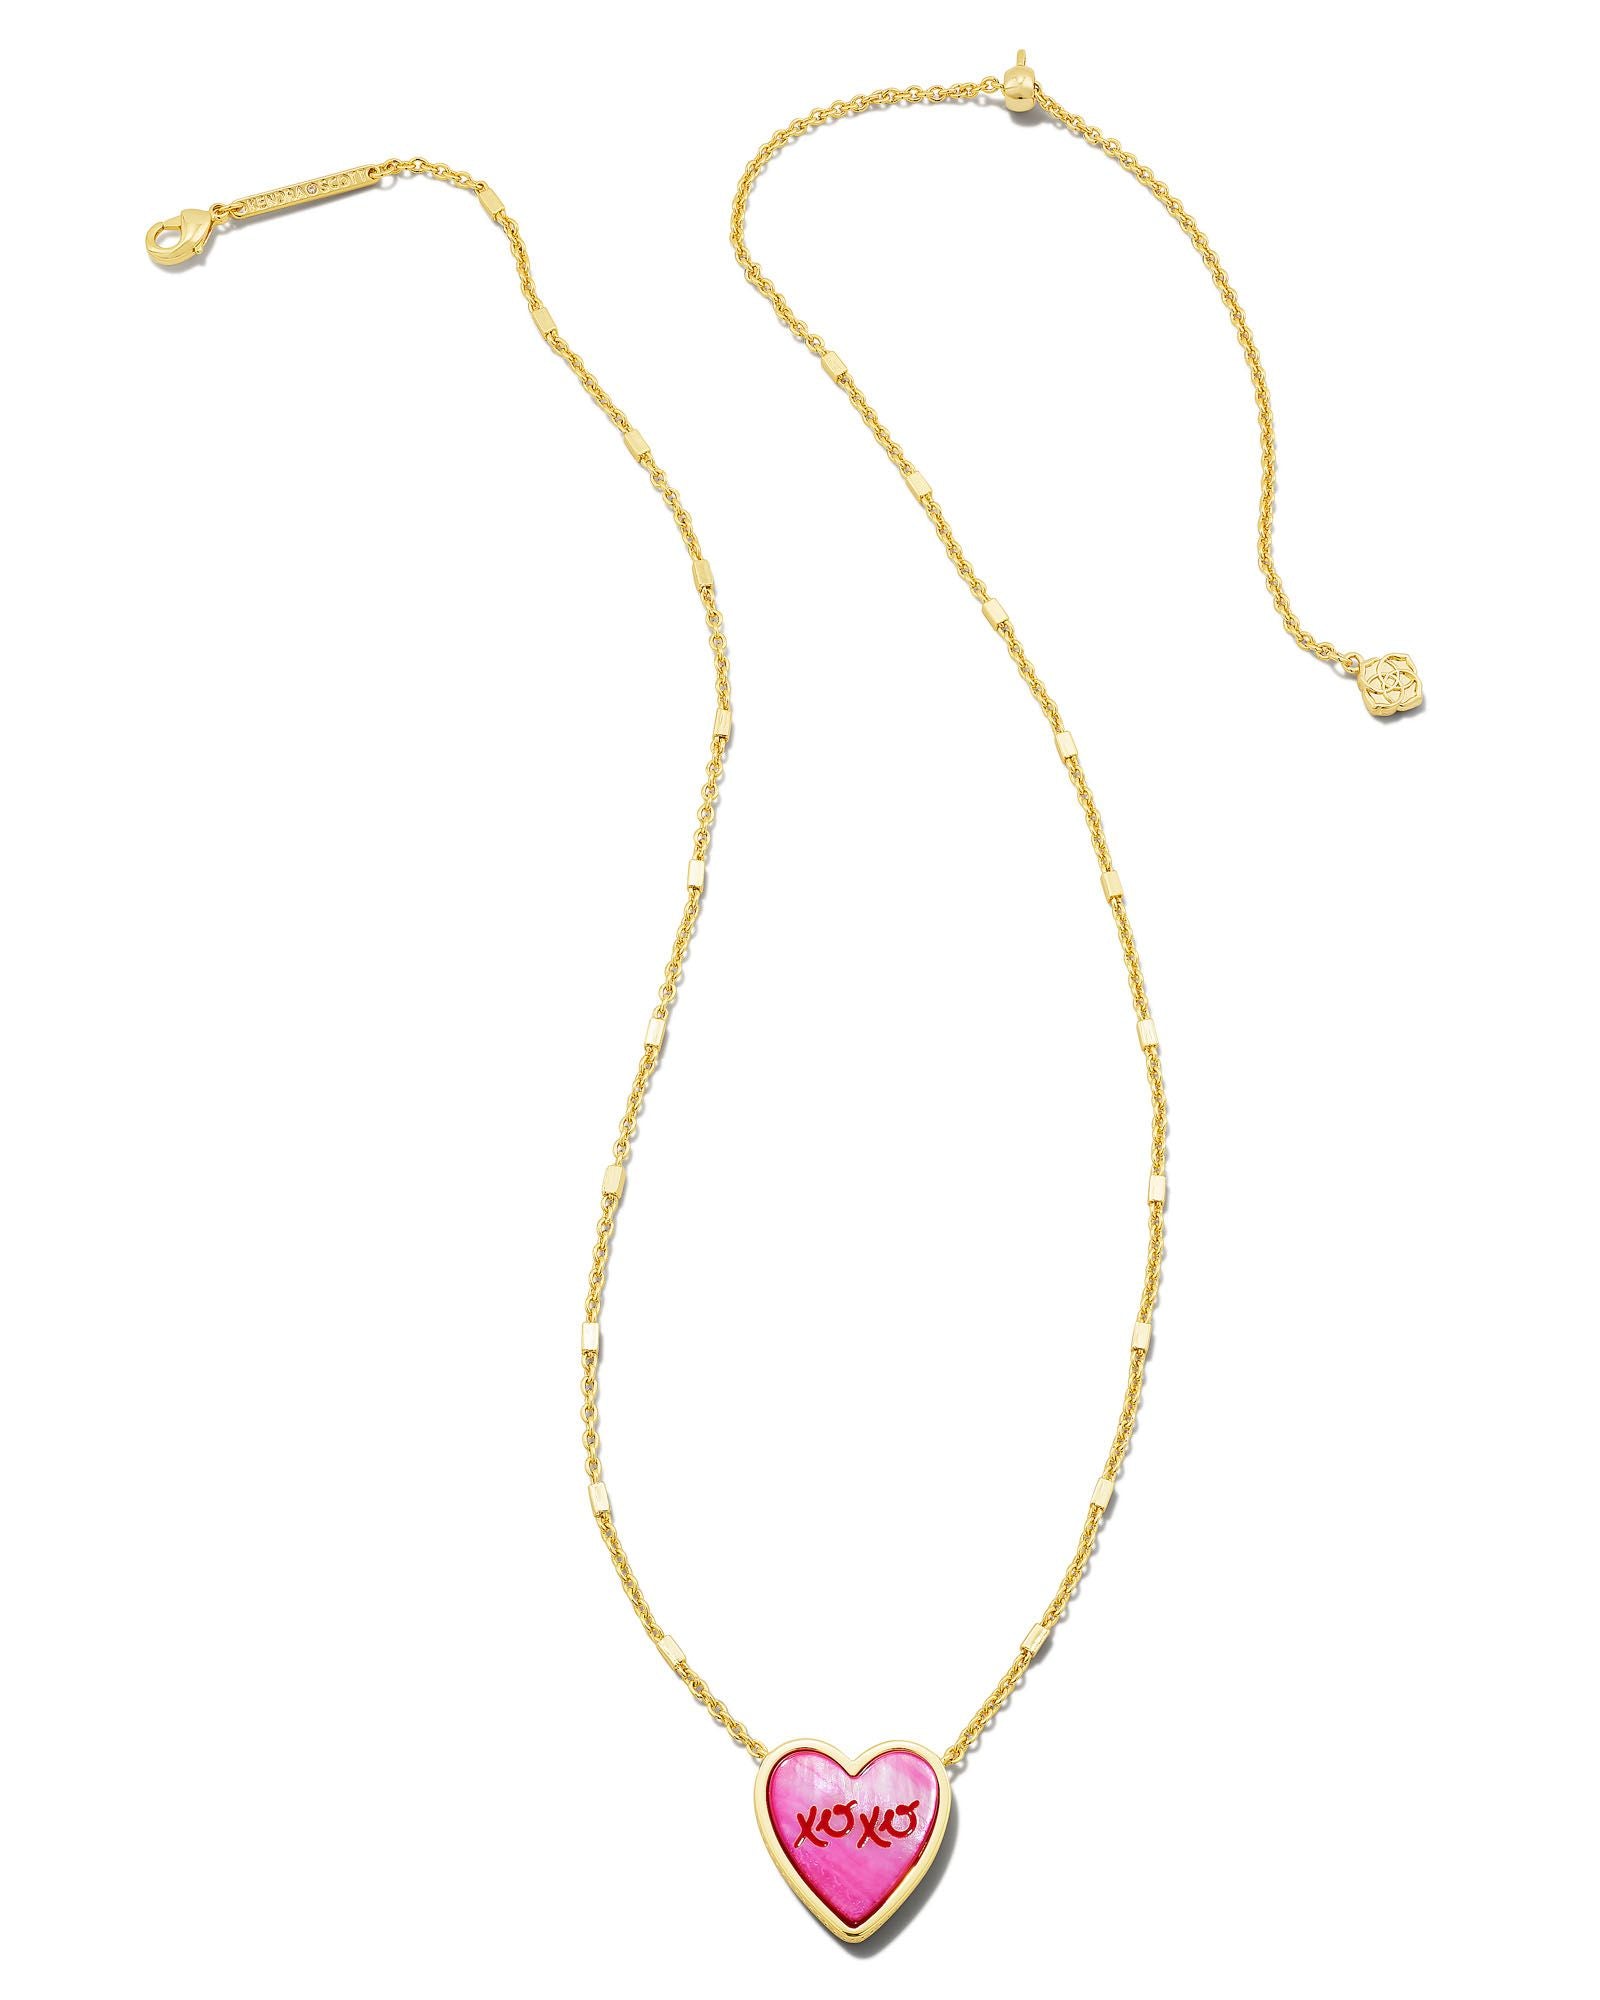 Kendra Scott | XOXO Heart Gold Pendant Necklace in Hot Pink Mother-of-Pearl - Giddy Up Glamour Boutique